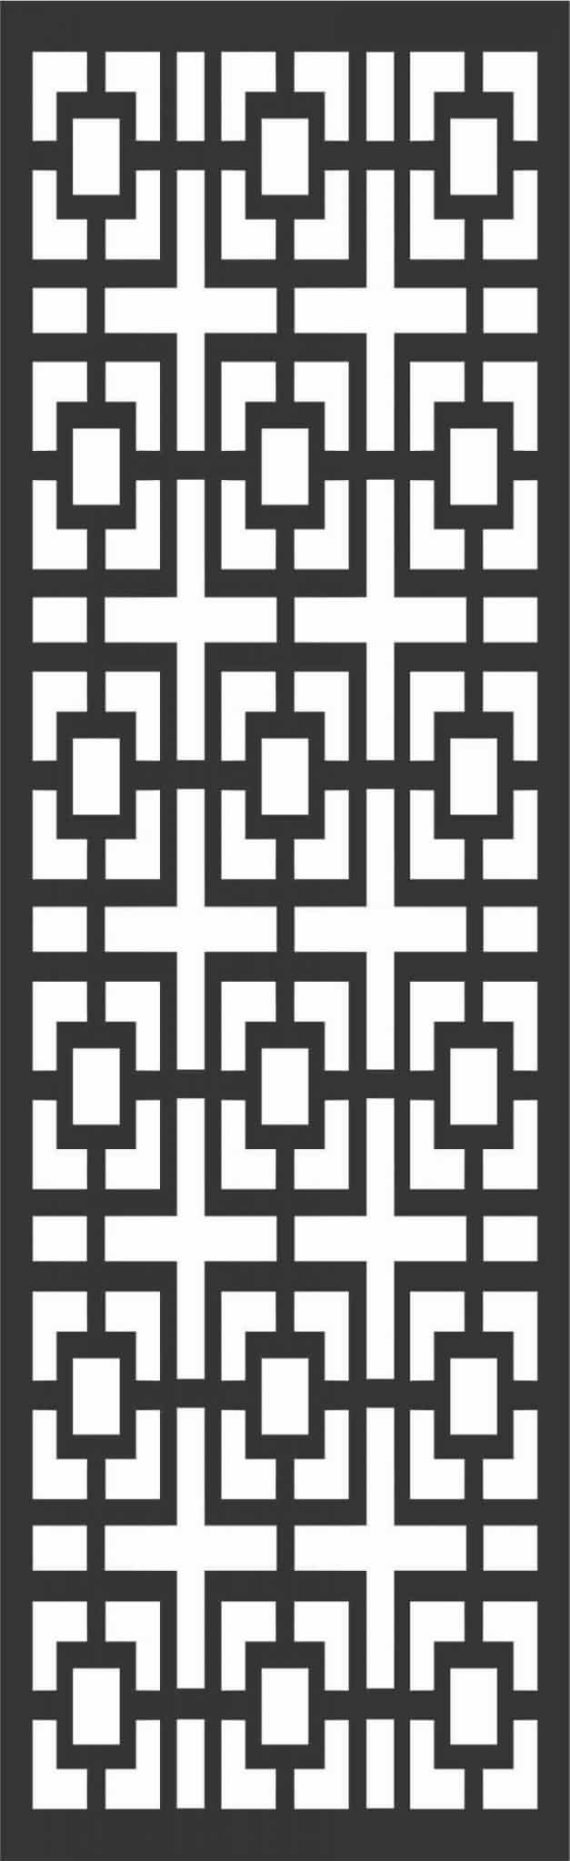 Decorative Screen Patterns for Laser Cutting 172